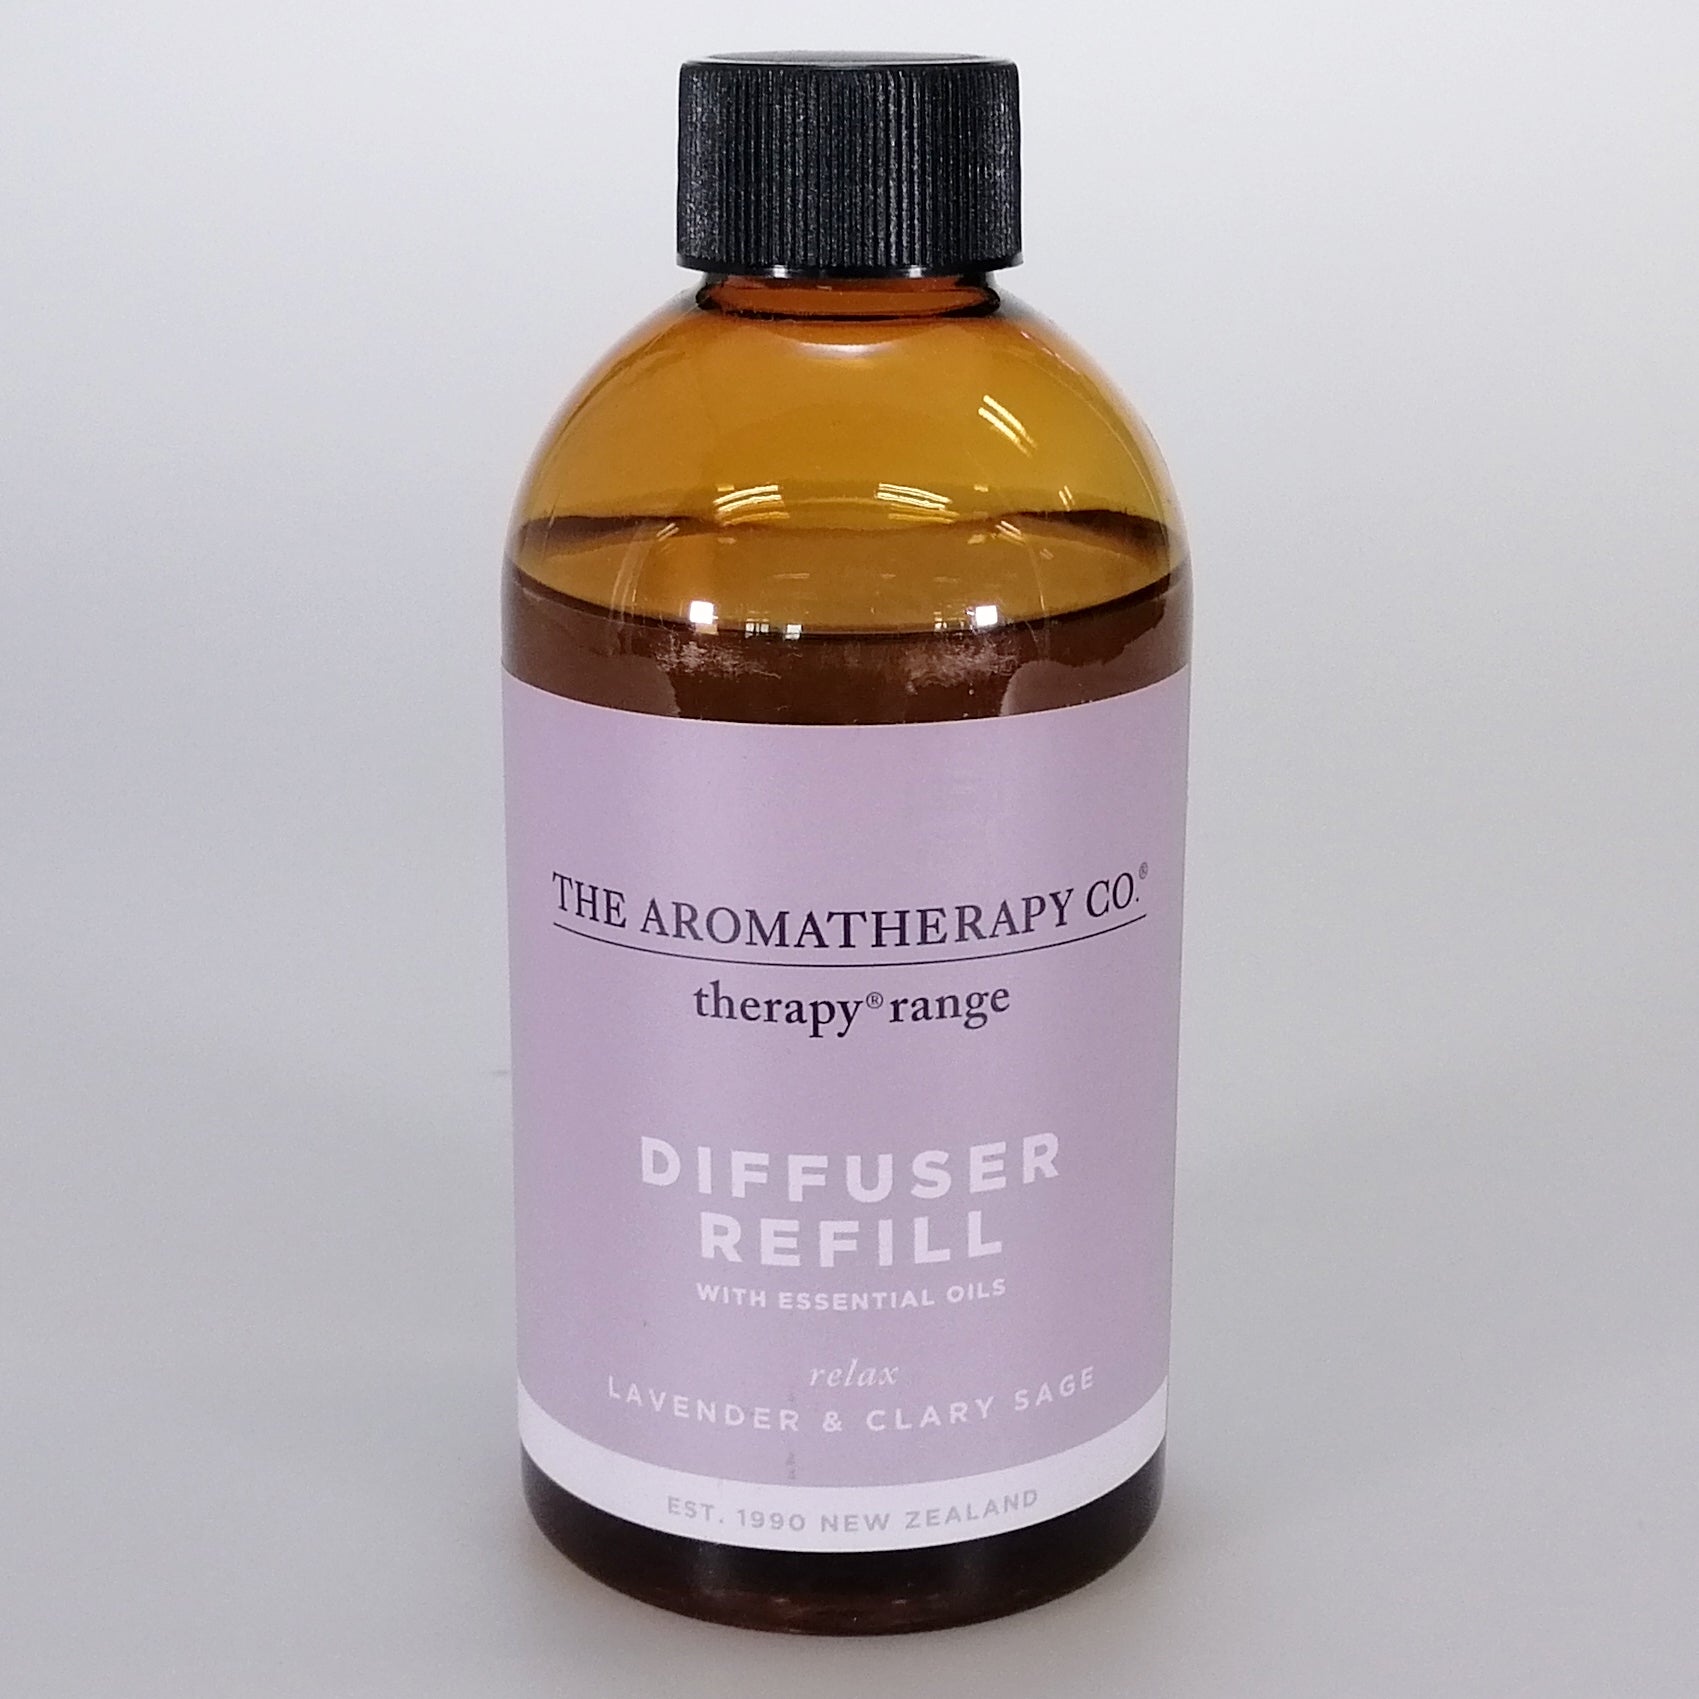 The Aromatherapy Company - Therapy Range 'Relax' - Diffuser Refill - Lavender & Clary Sage